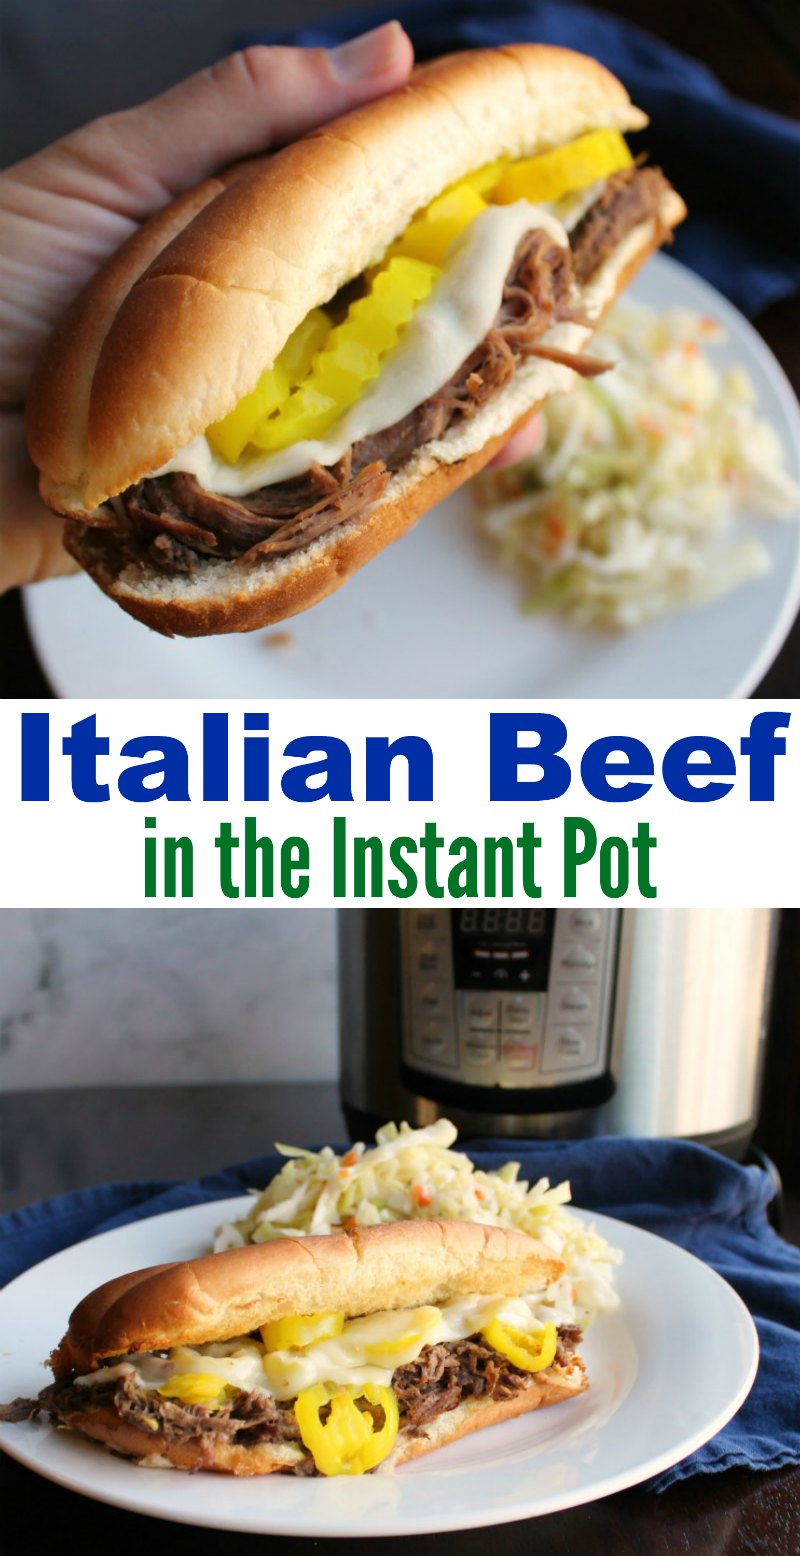 Big Italian beef flavor is possible in a fraction of the time with help from a pressure cooker. This is a dinner they’ll request over and over.